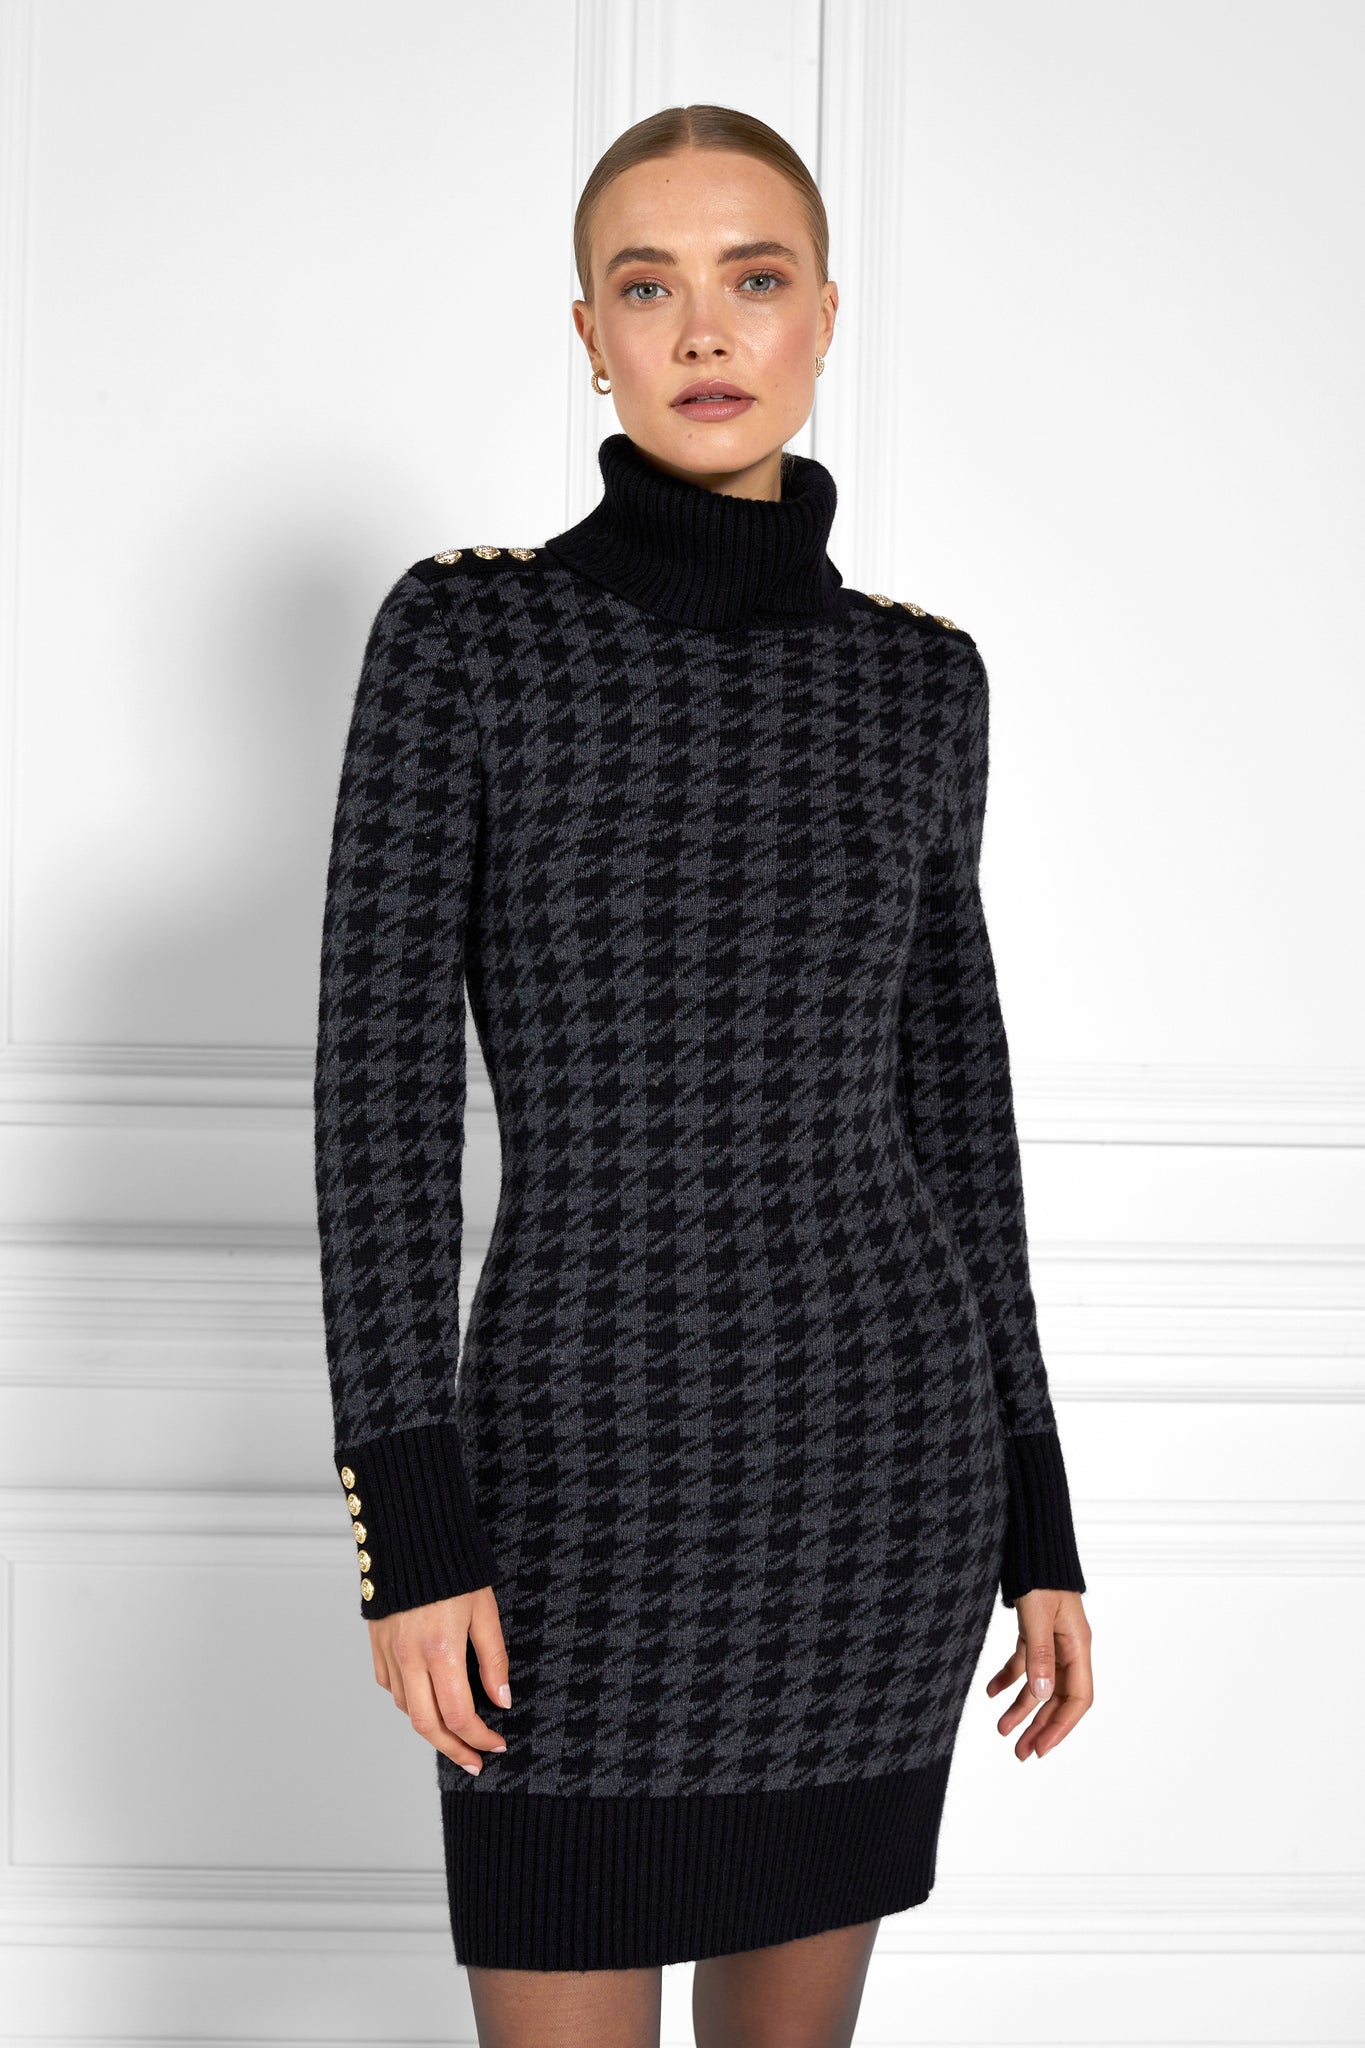 womens black and dark grey houndstooth roll neck jumper dress with contrast black cuffs and ribbed hem with gold button detail on the cuffs and shoulders